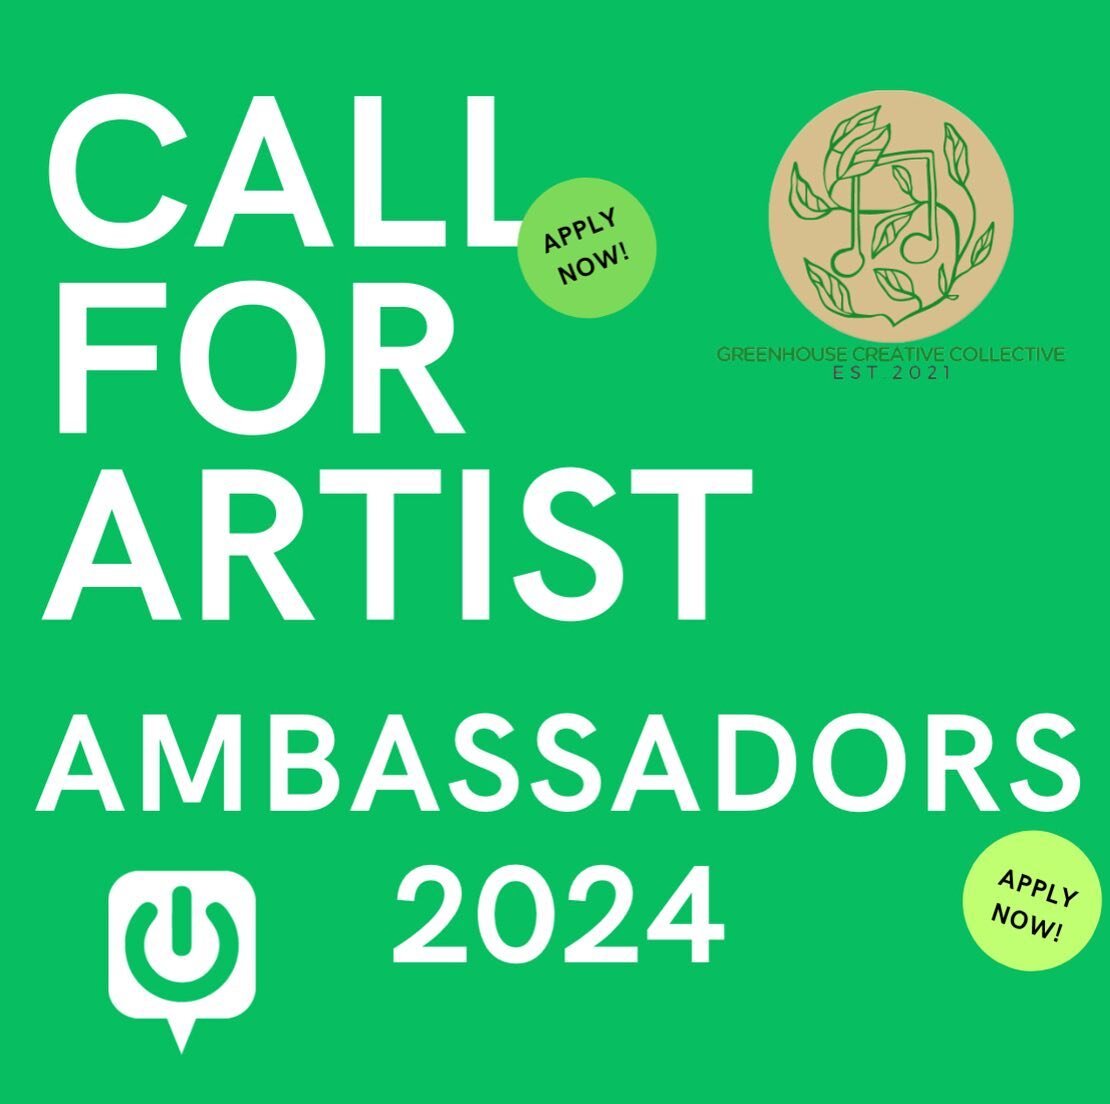 &ldquo;At the&nbsp;deepest level, the creative process and the healing process arise from a single source. When you are an&nbsp;artist, you are a healer...&rdquo; ― Rachel Naomi Remen

Join us! We are looking for 3 artist ambassadors to support music